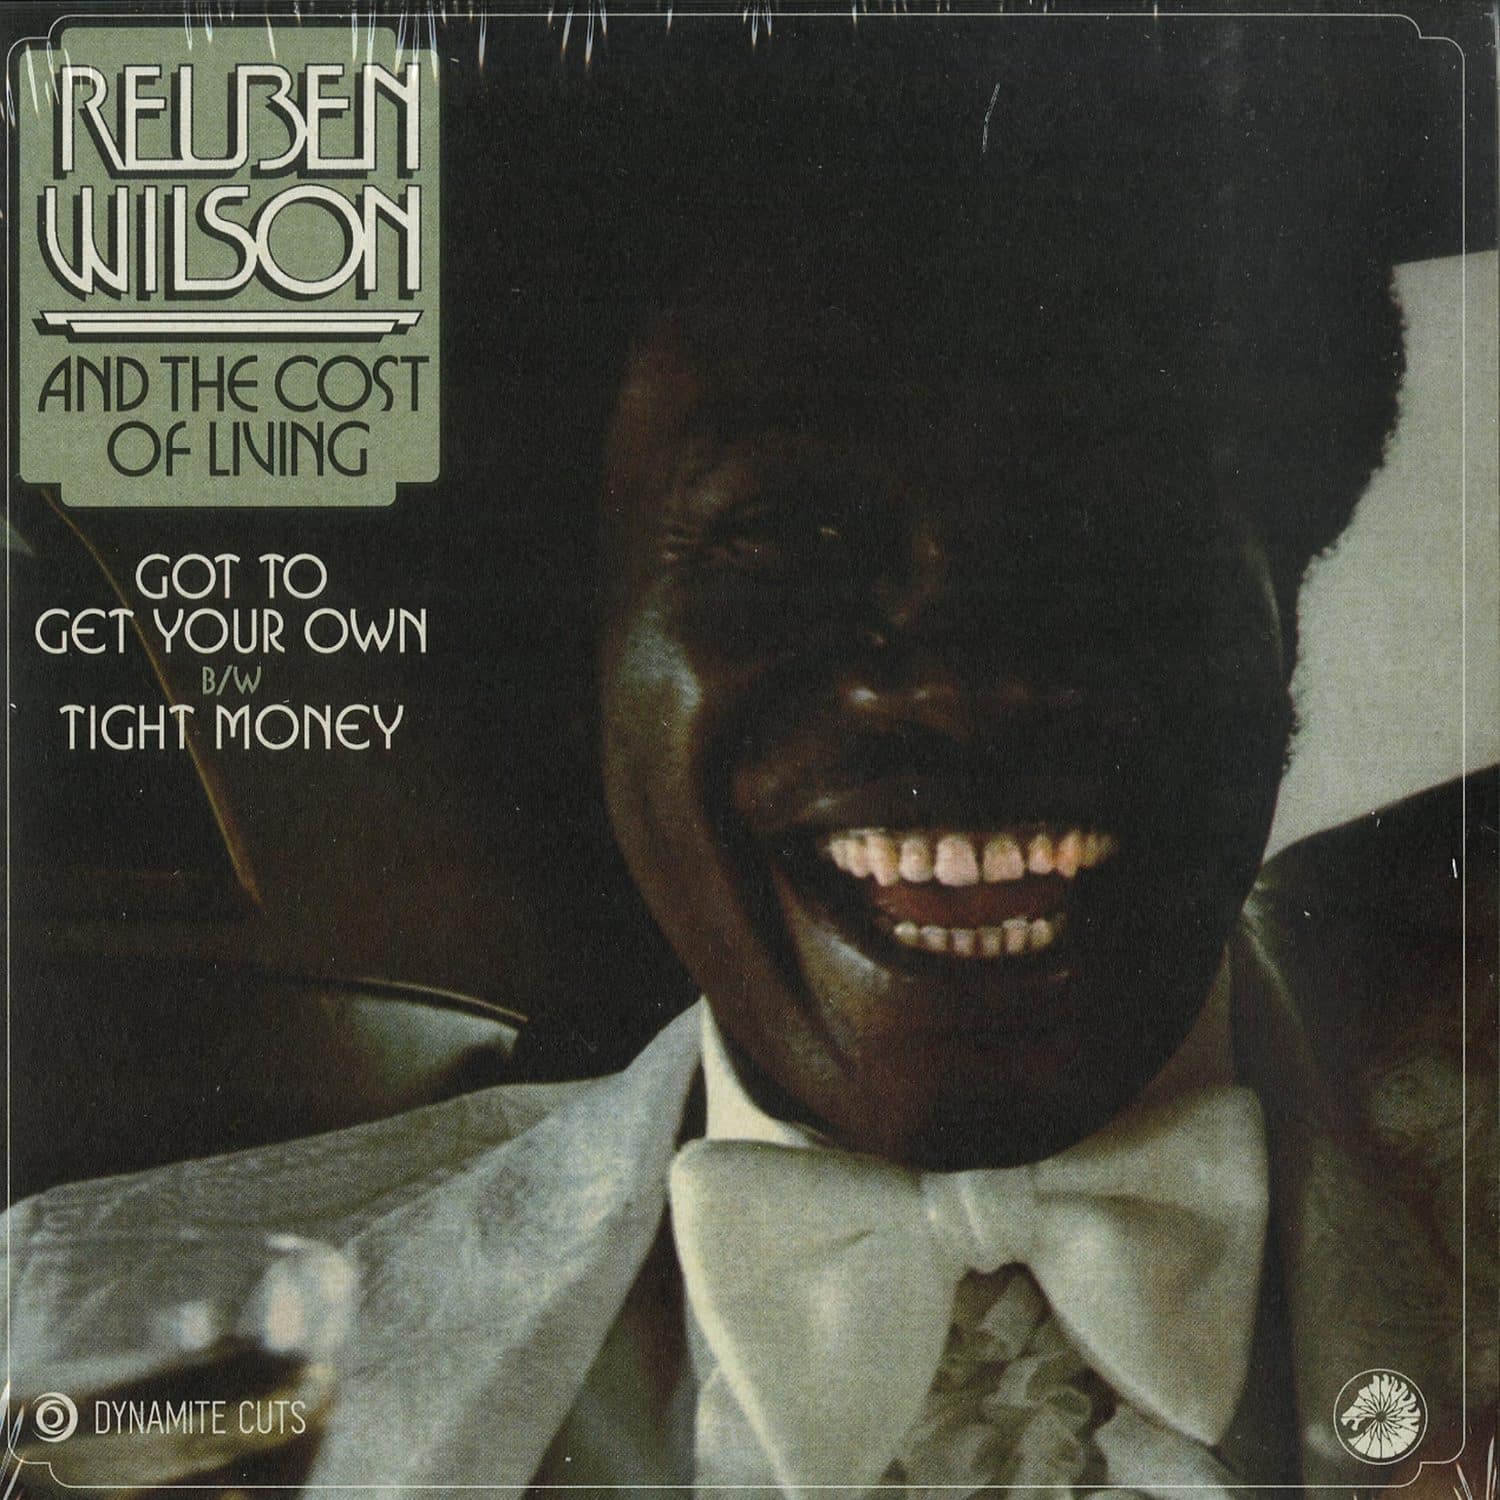 Reuben Wilson And The Cost Of Living - GOT TO GET YOUR OWN / TIGHT MONEY 